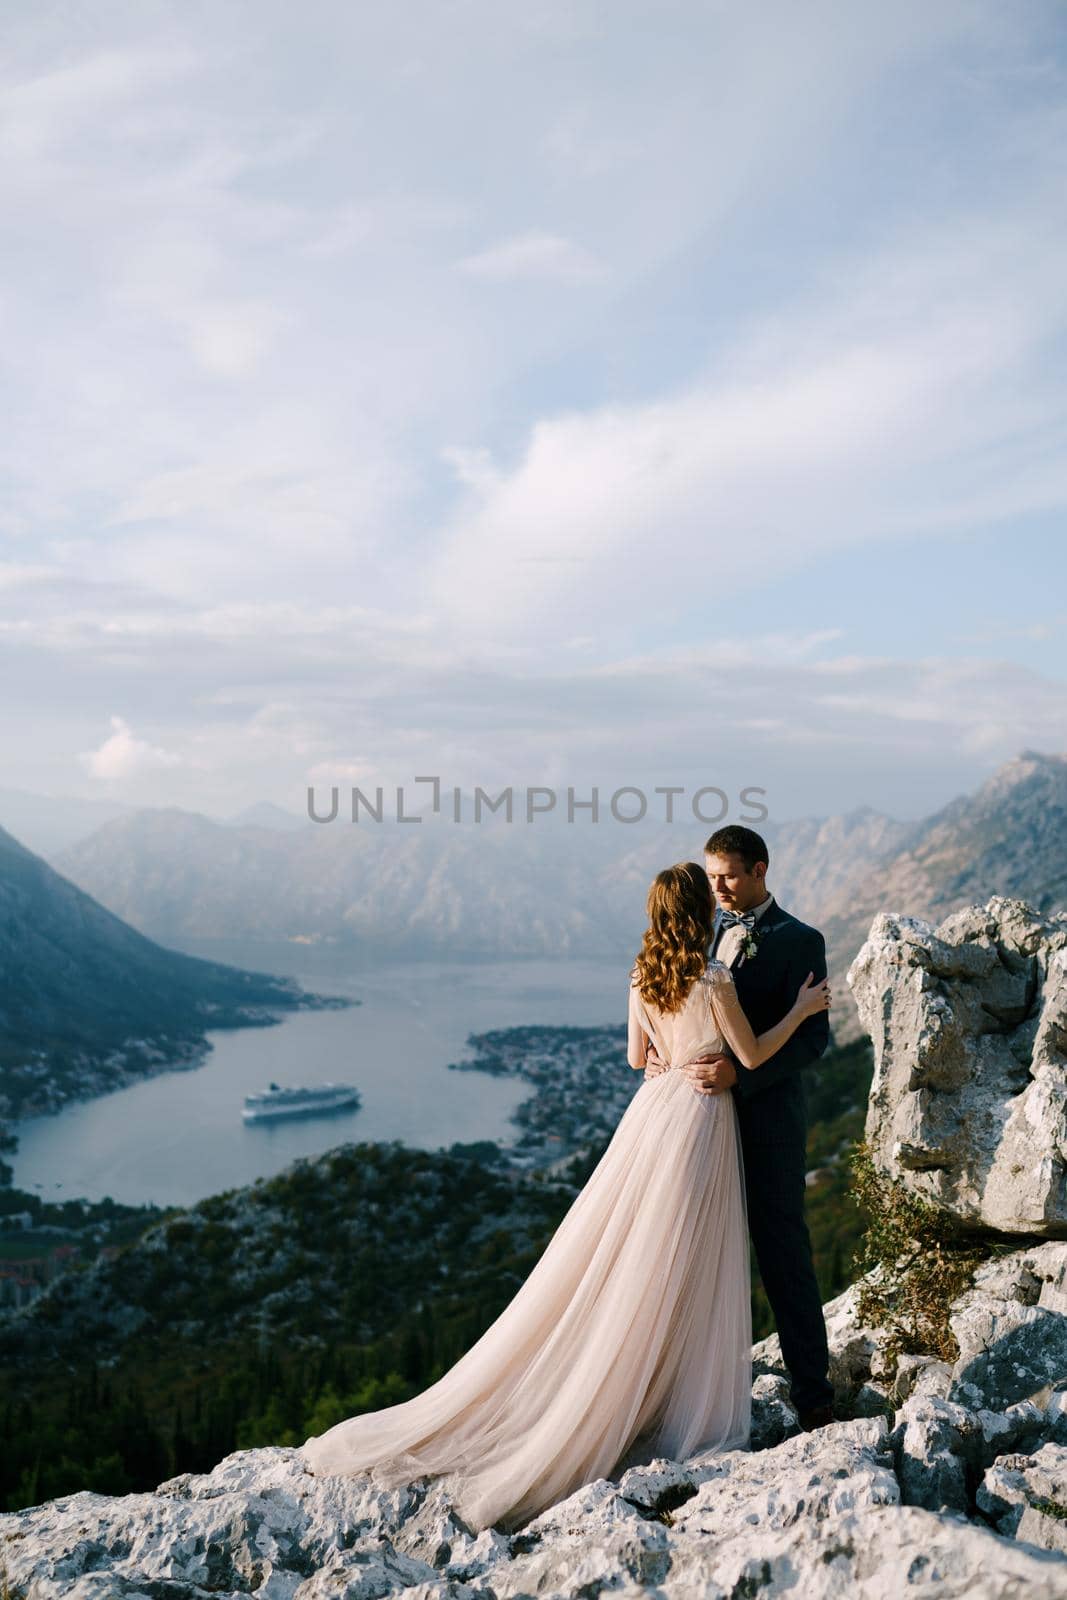 Groom hugs bride by the waist on a rocky mountain overlooking the bay. High quality photo